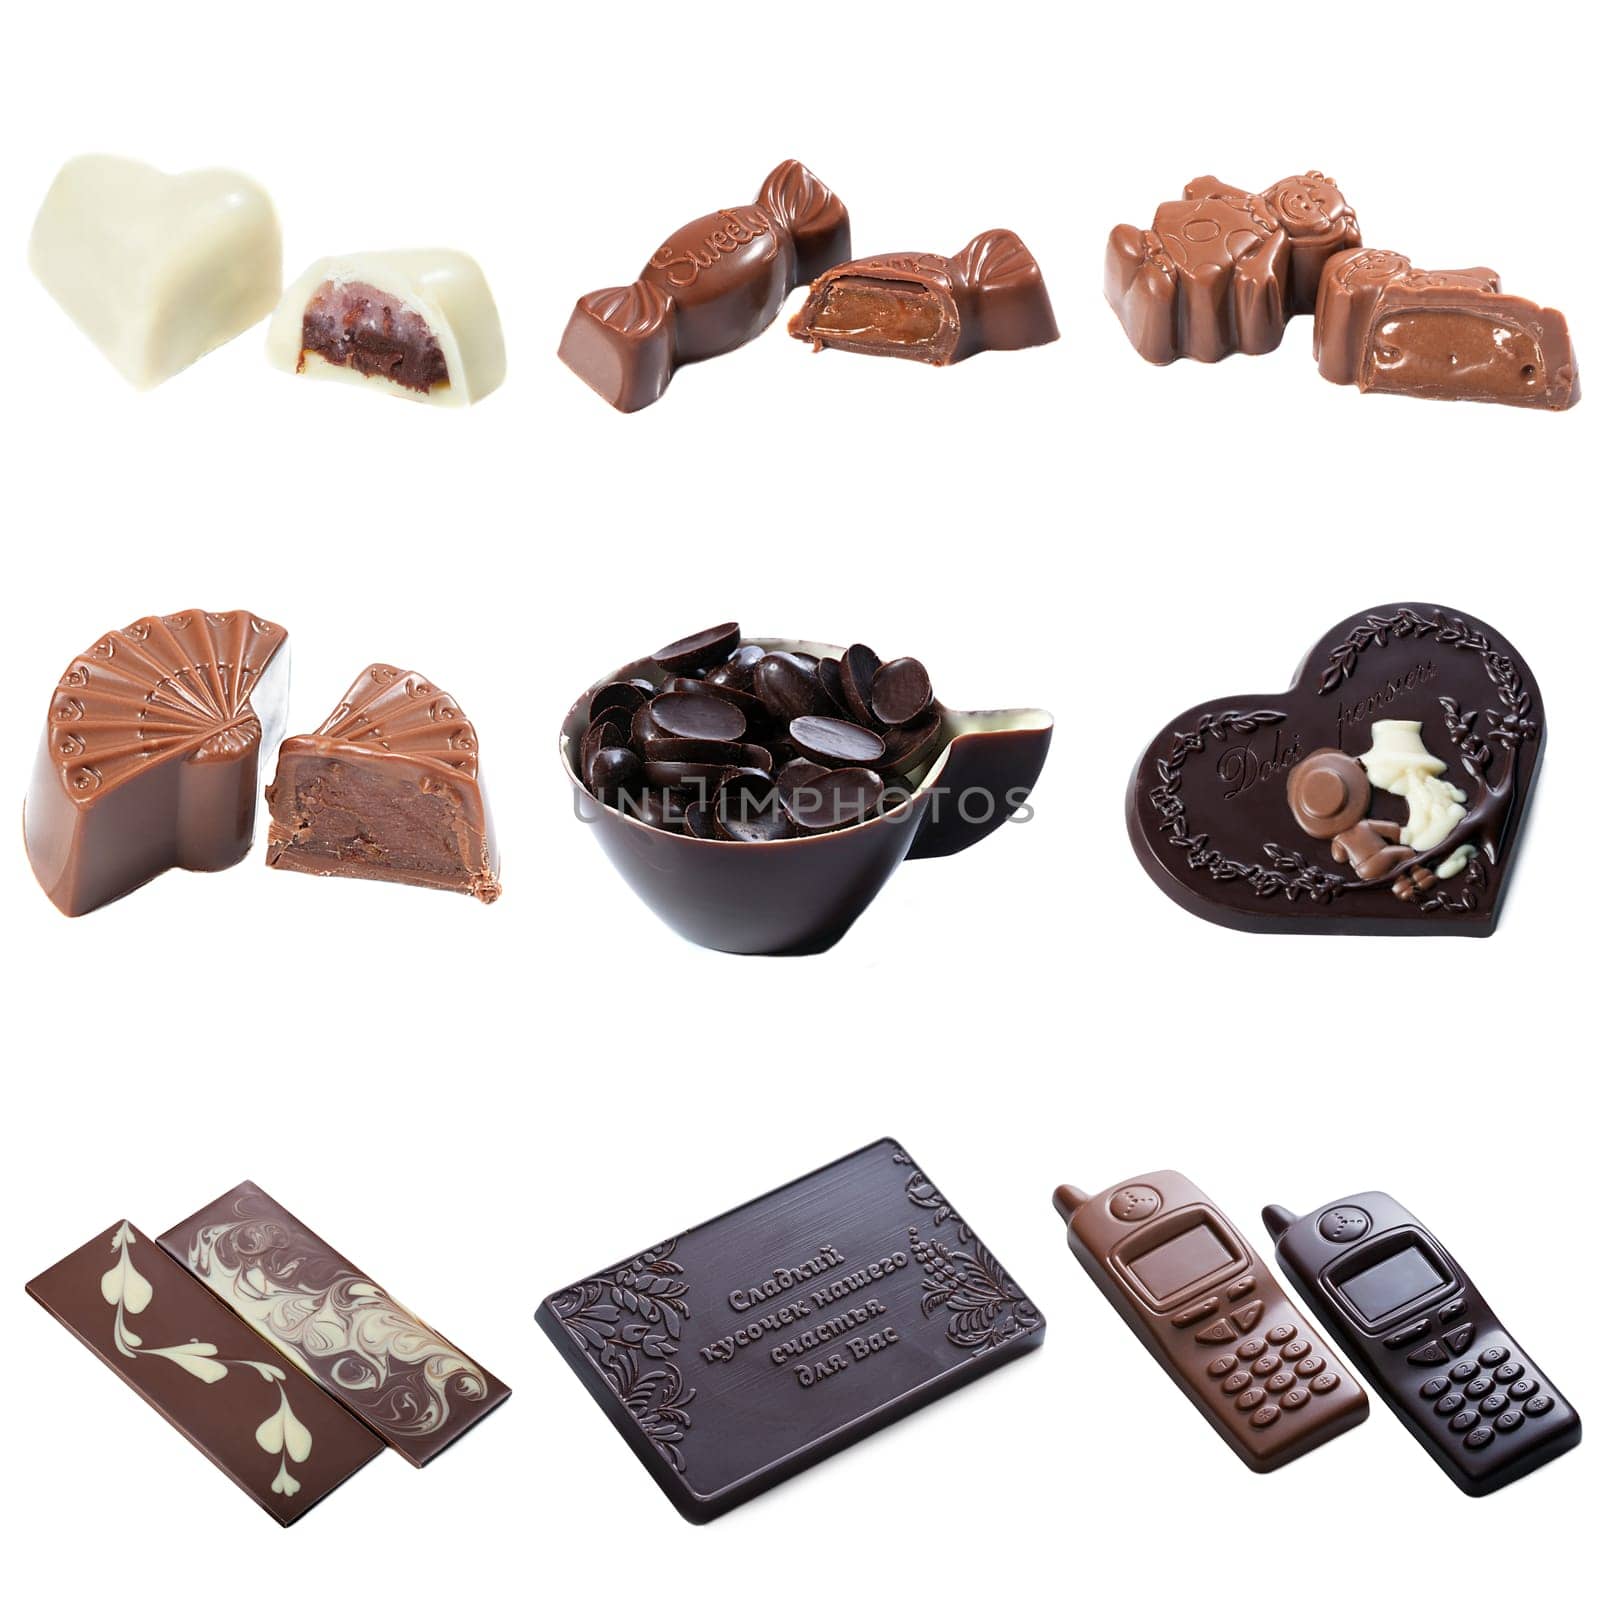 Set of souvenir chocolates made in different forms by rivertime